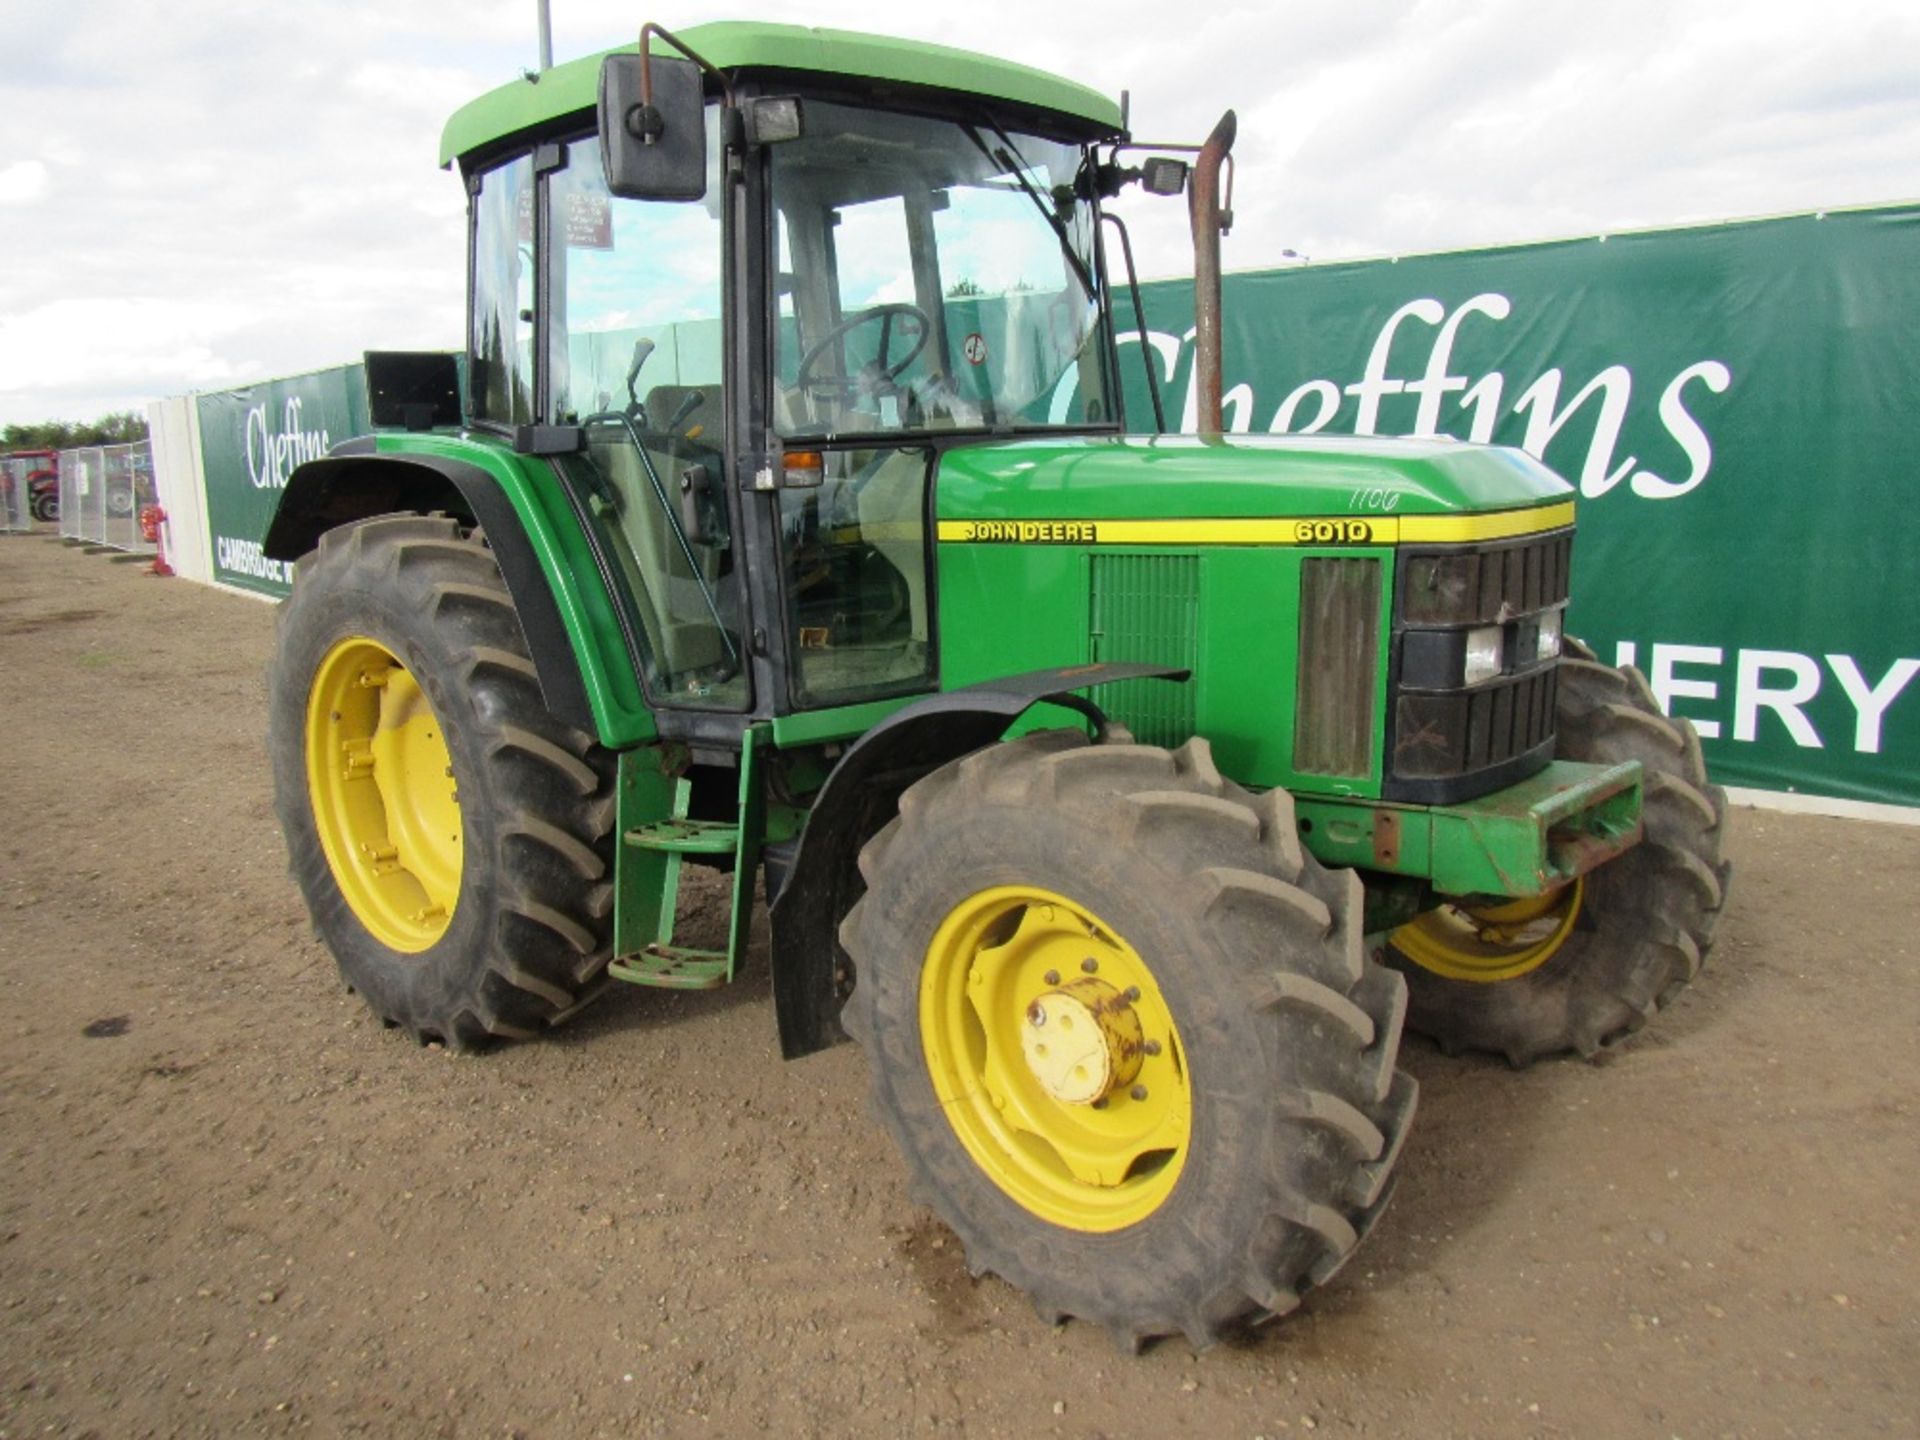 2000 John Deere 6010 4wd Tractor with Air Con & Creeper Gear. From Veg Rig. 4542 hrs. Reg No X153 - Image 3 of 17